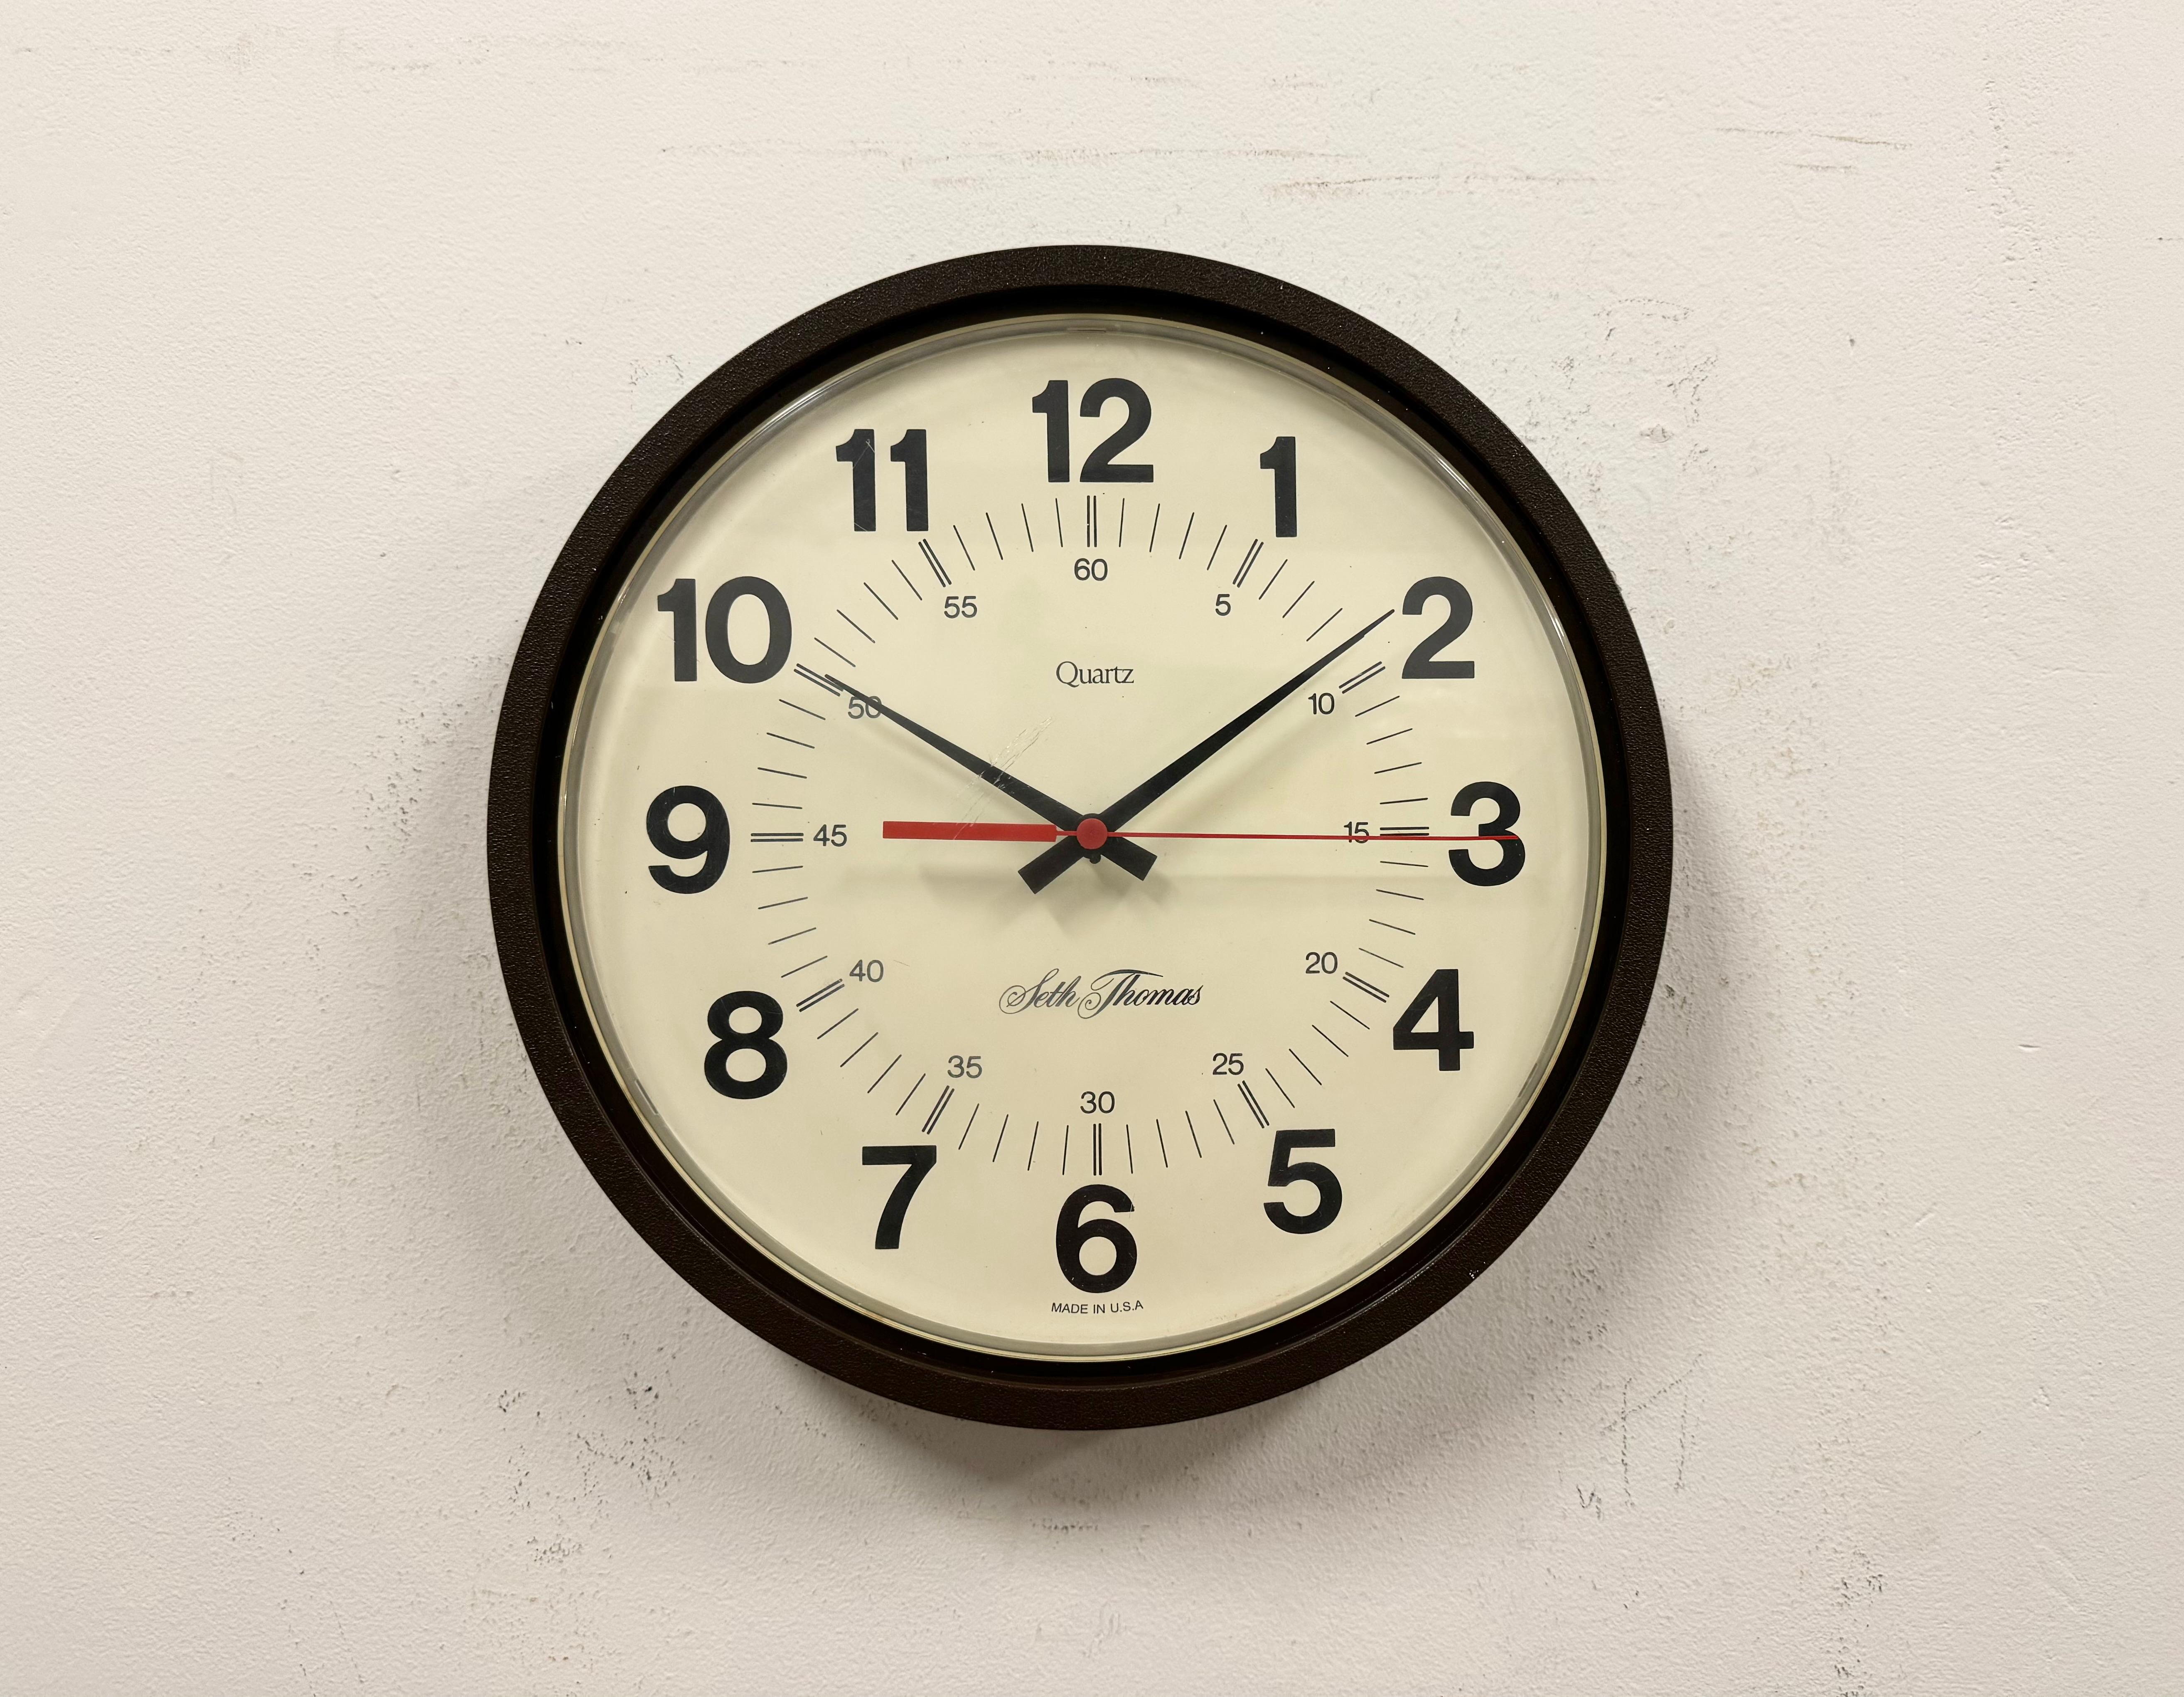 Vintage bakelite wall clock made by Seth Thomas Clock Company in United States during the 1980s .It features a dark brown bakelite case and a clear plastic glass cover. The battery-powered clockwork requires one AA battery
The diameter of the clock